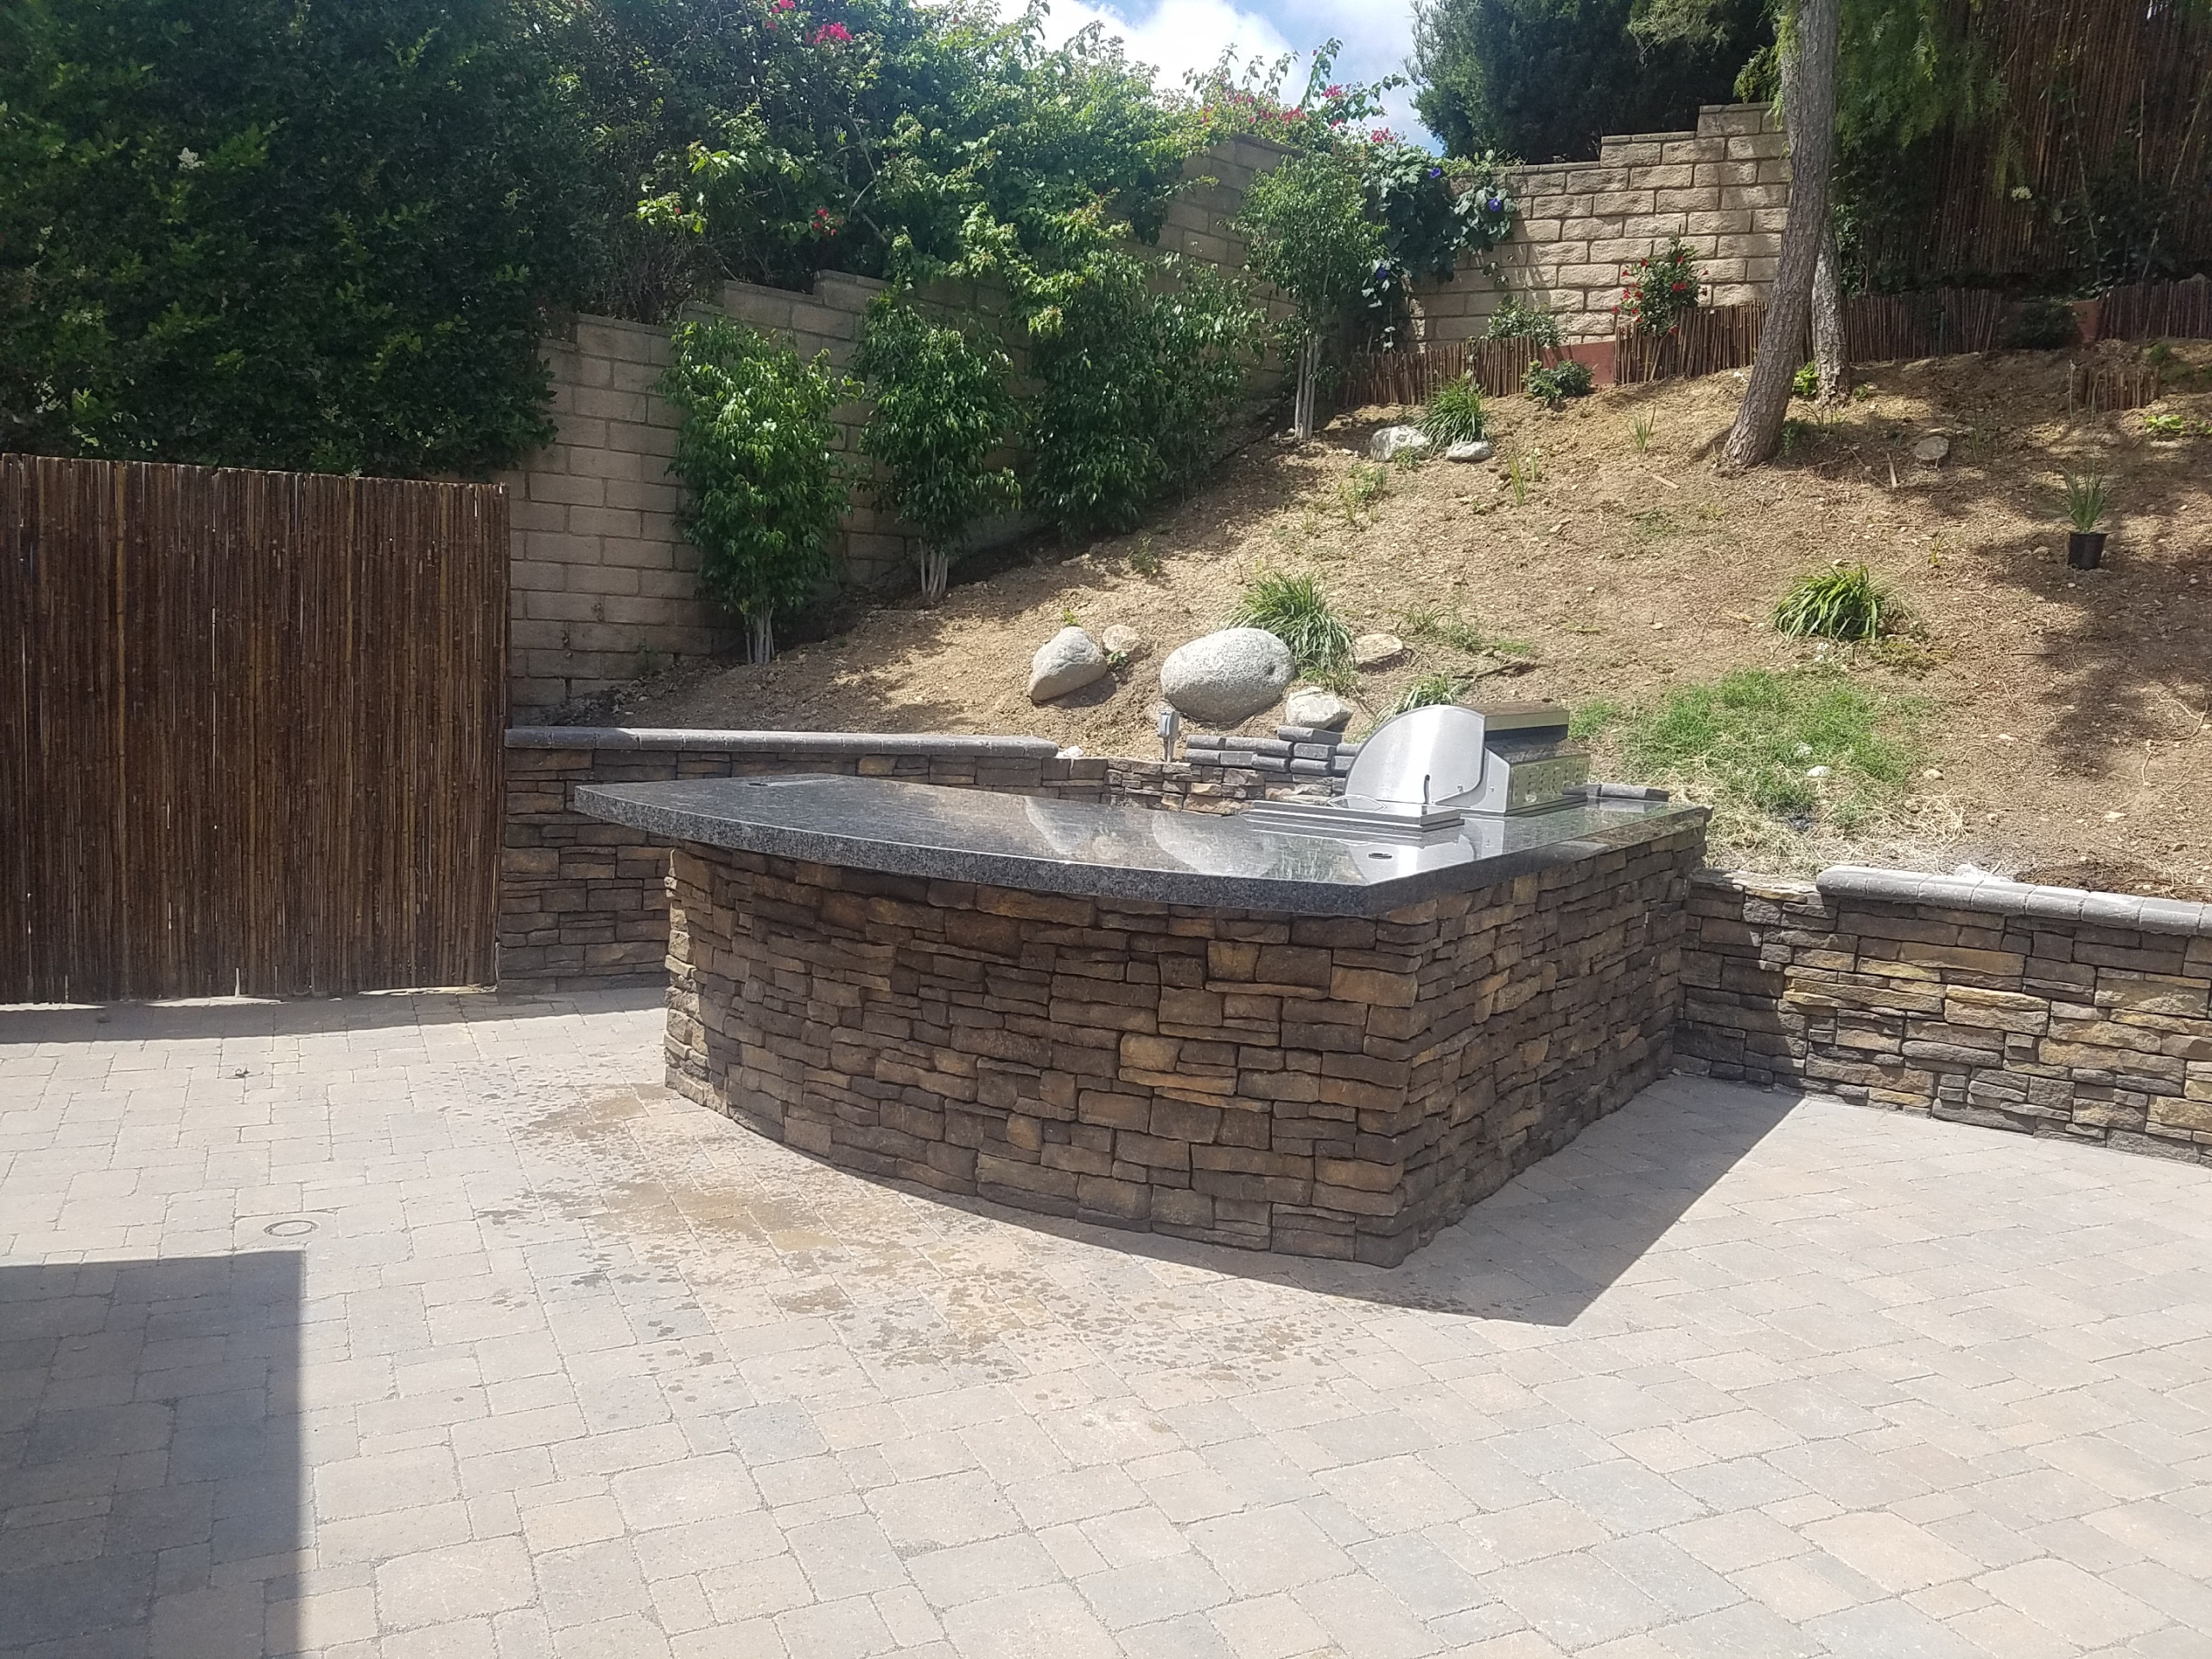 Traditional L-shaped Island with stone walls
Patio kitchen – traditional backyard patio kitchen idea in Los Angeles